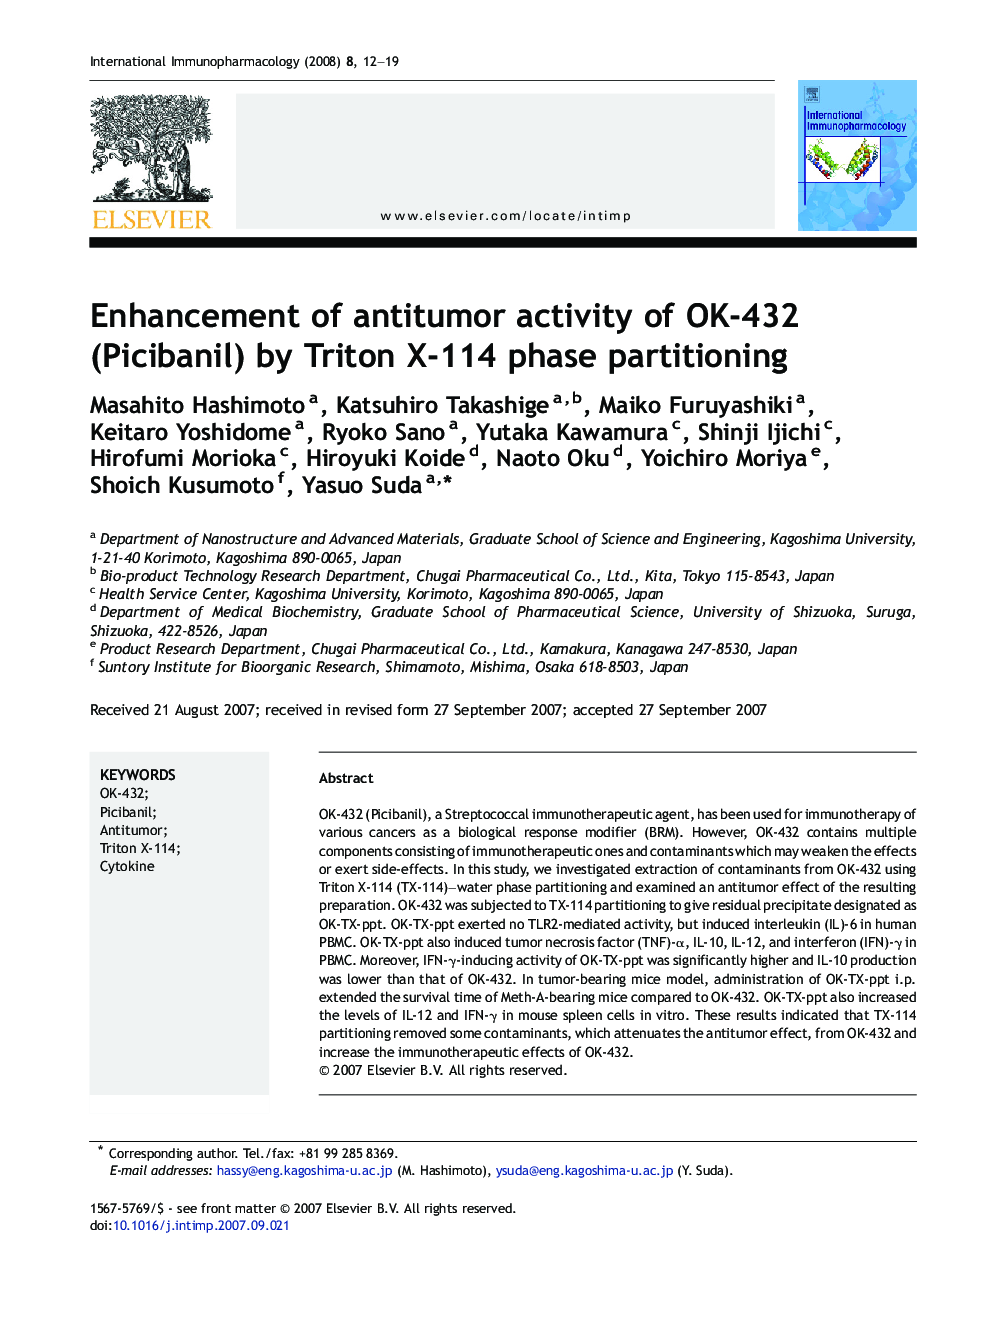 Enhancement of antitumor activity of OK-432 (Picibanil) by Triton X-114 phase partitioning